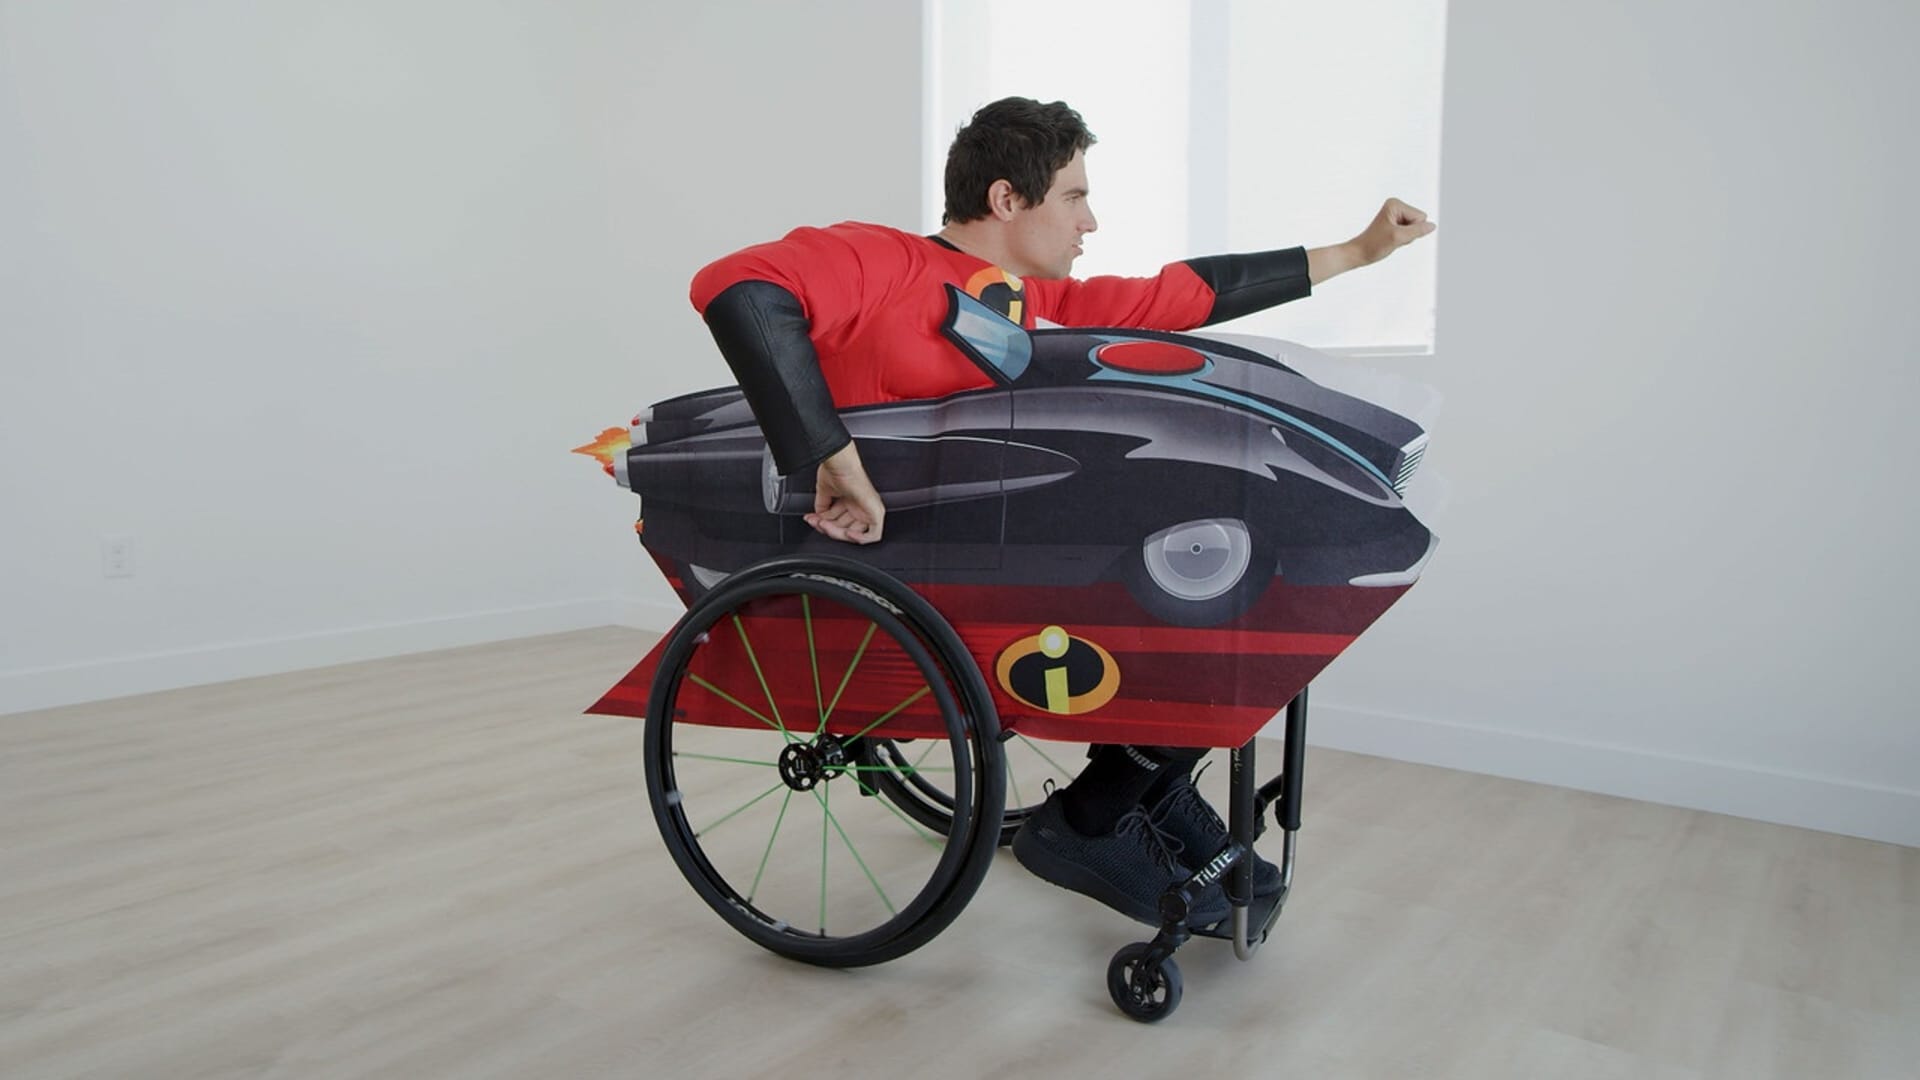 Disney's parks, experiences and consumer products division is expanding its merchandise collections to include more inclusive items like costumes for wheelchairs.